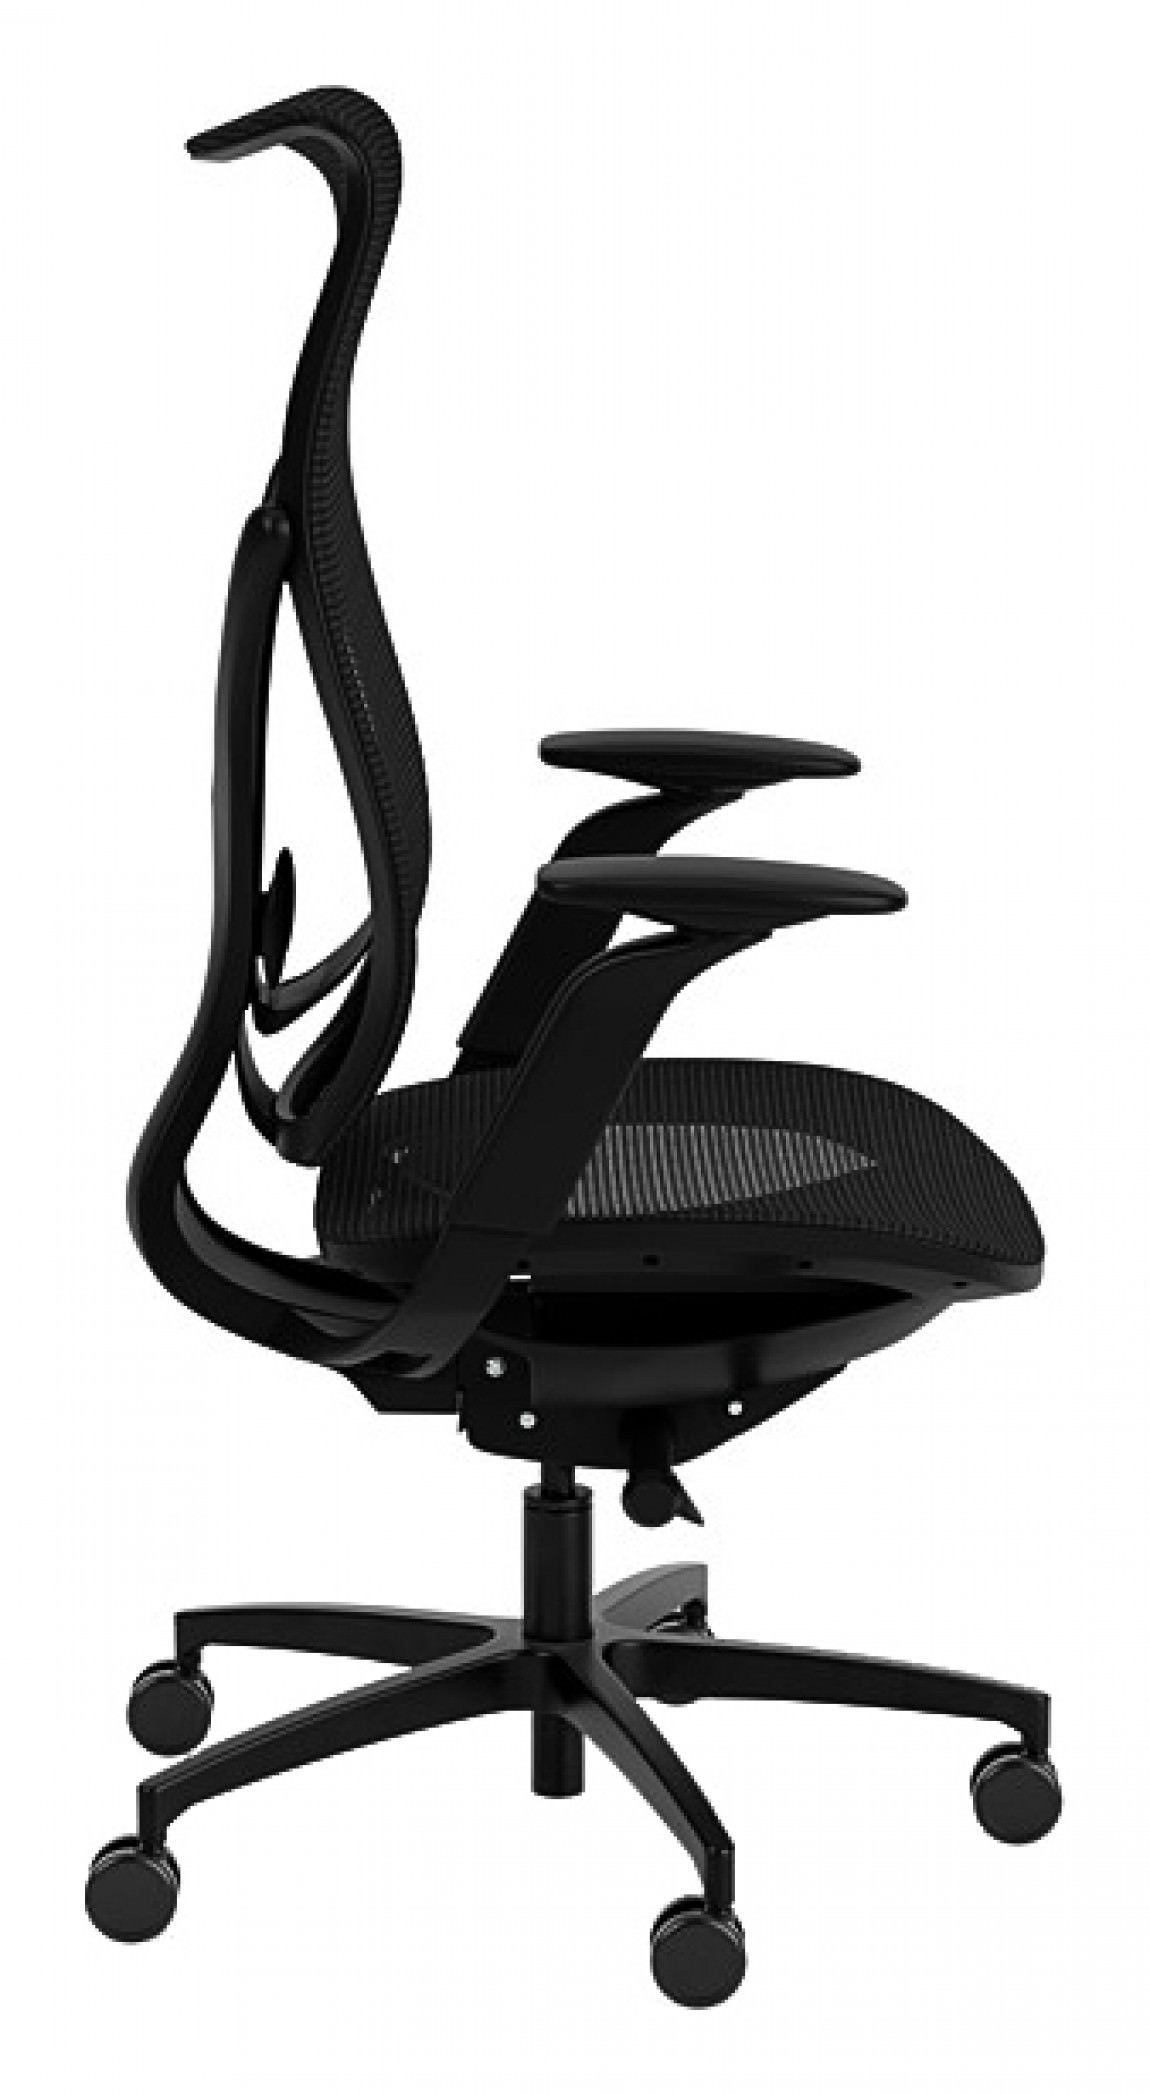 High Back Mesh Chair with Arms